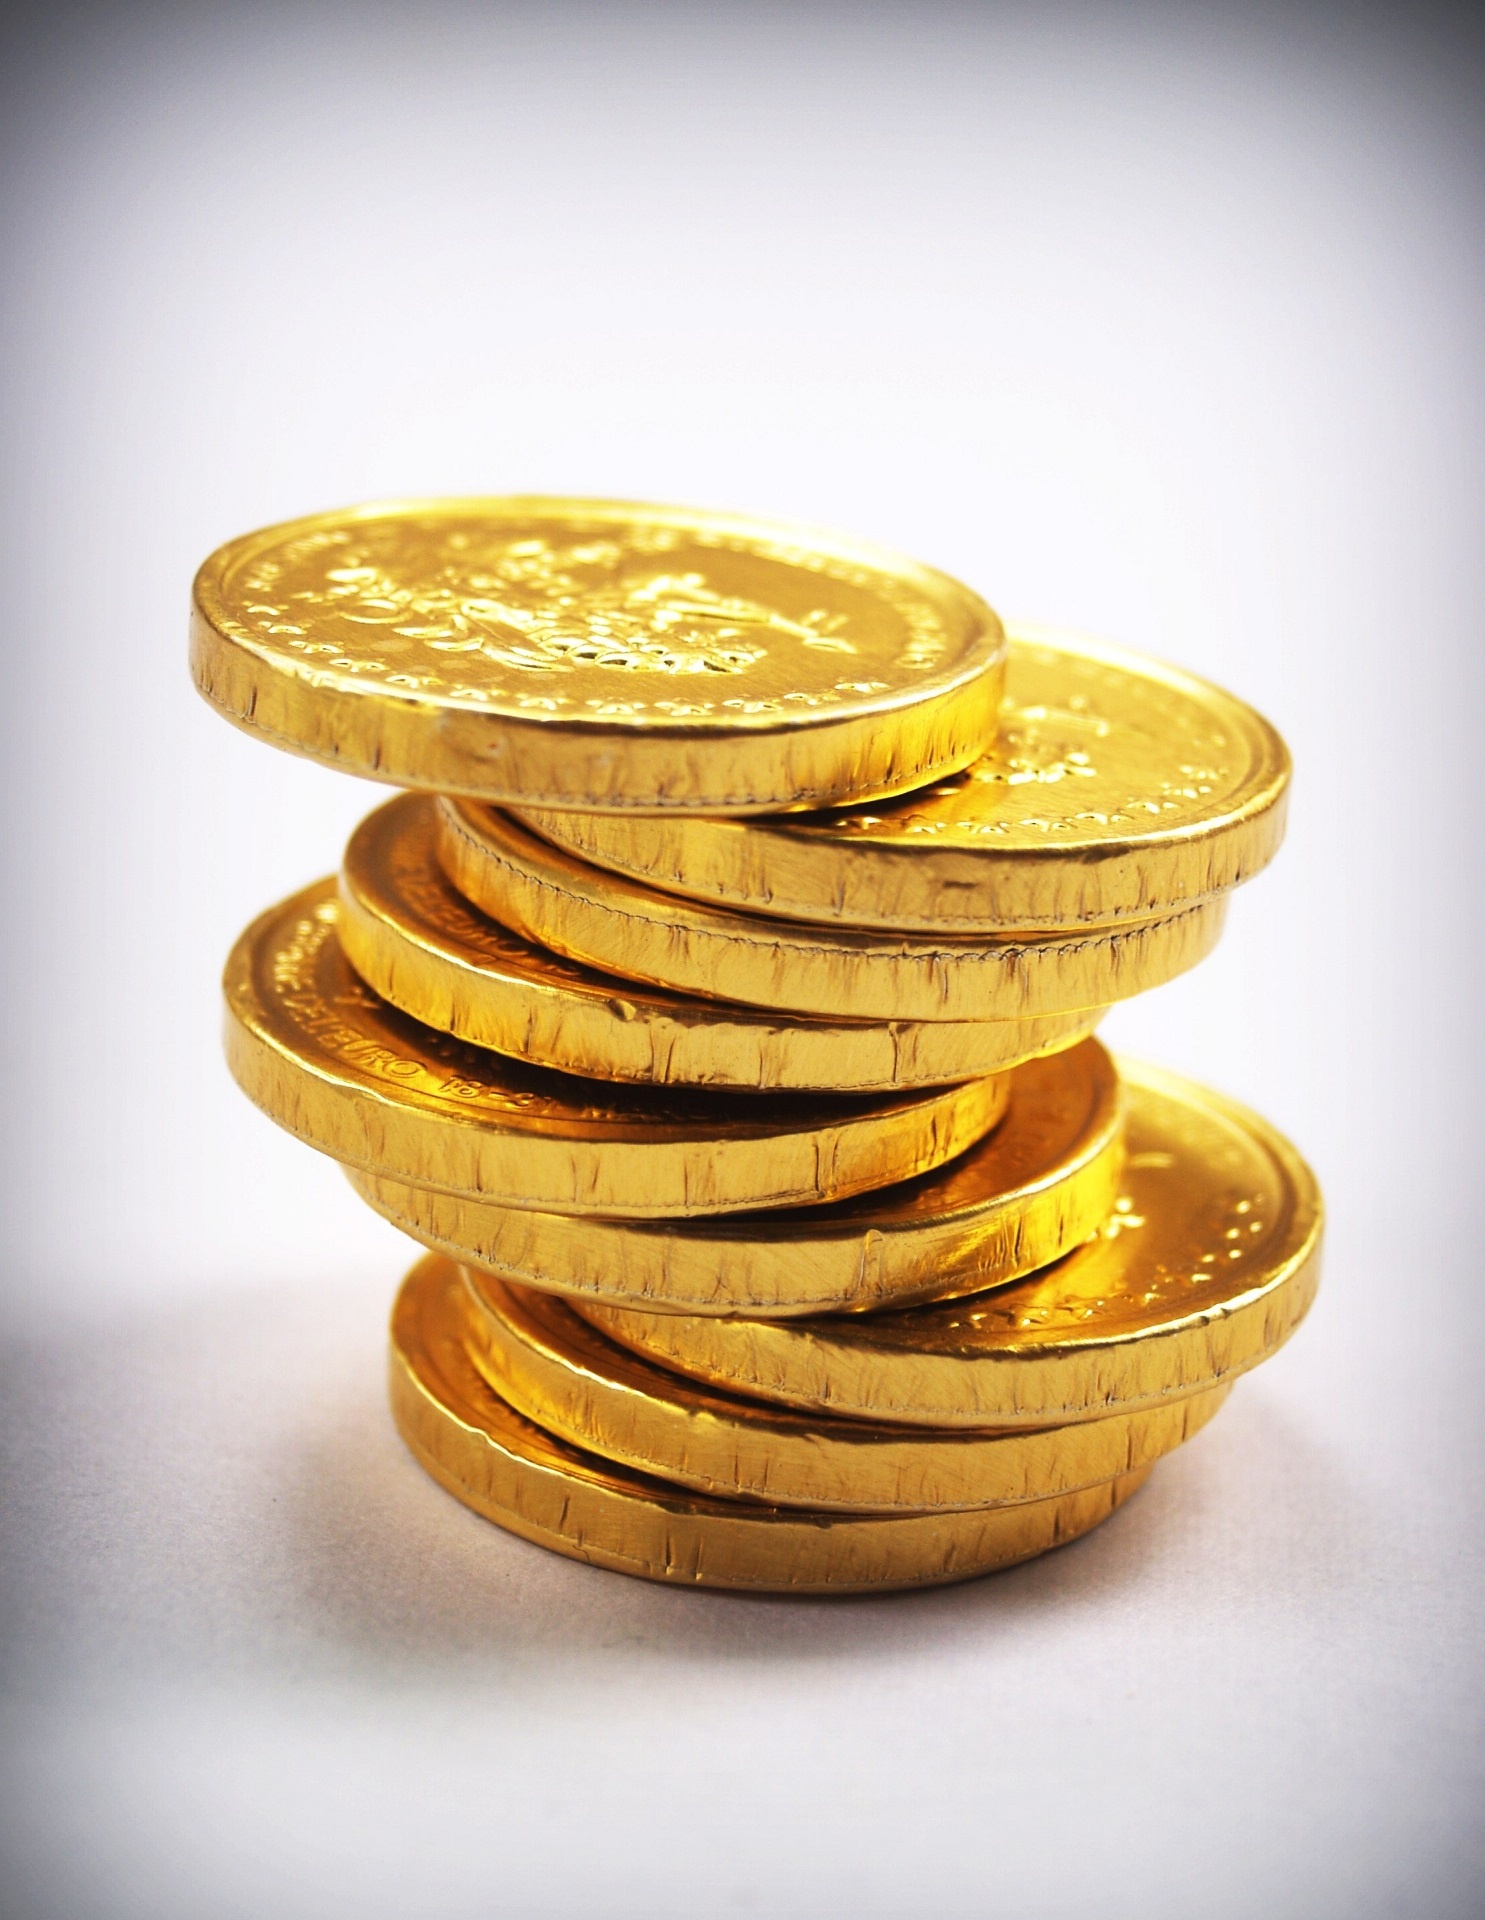 gold-coins-free-stock-photo-public-domain-pictures